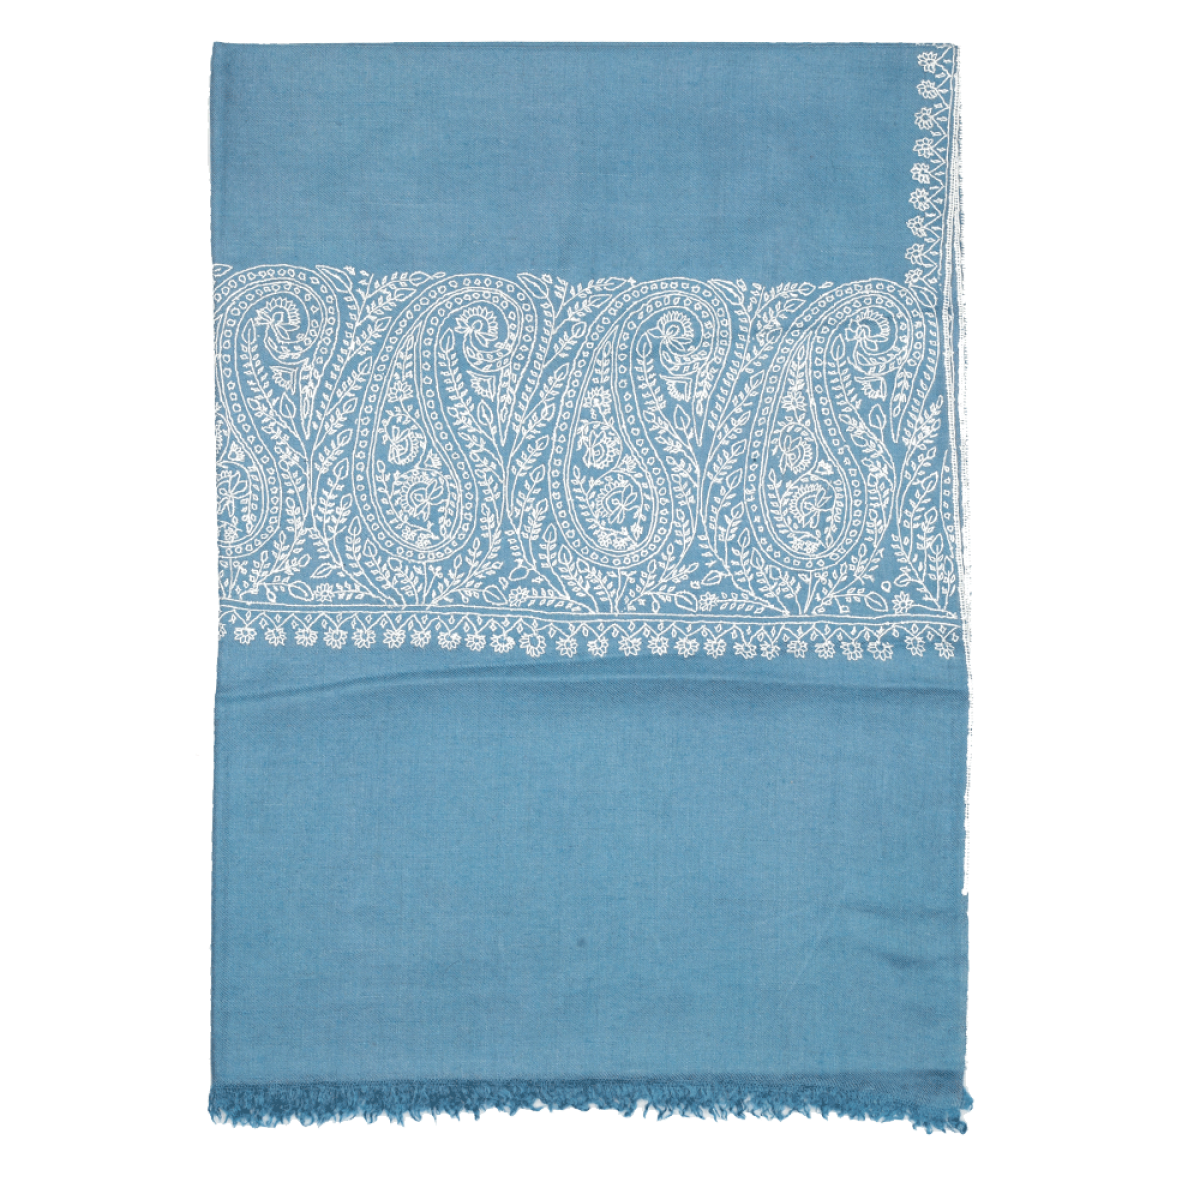 Embroidered Pashmina Stole - Frost Blue & White